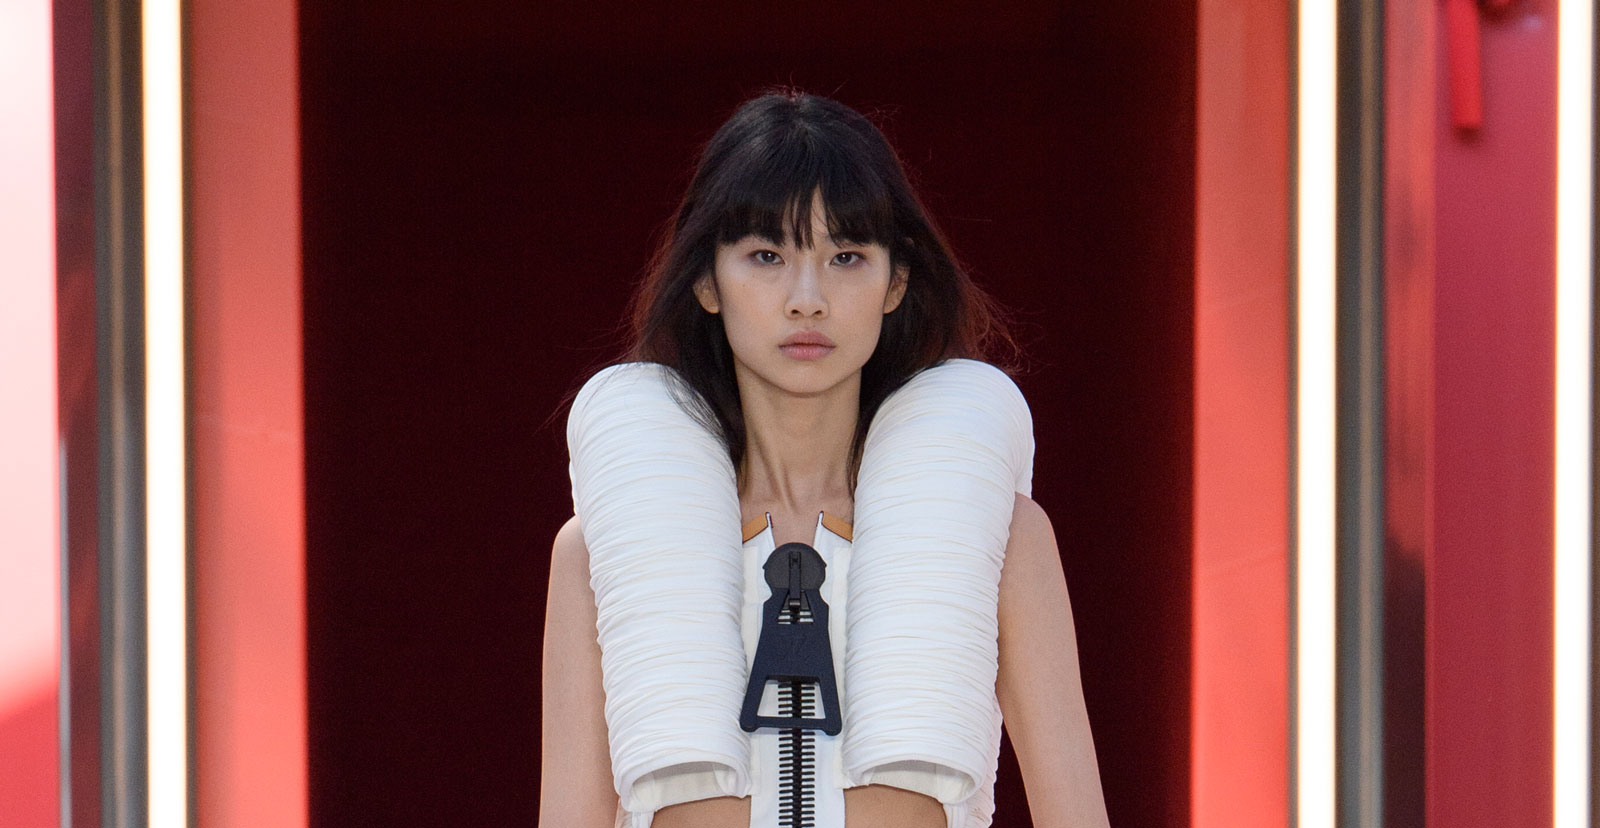 ⌘ on X: Hoyeon Jung's runway debut was at Louis Vuitton 2016 RTW and now  she is a Global Ambassador!  / X